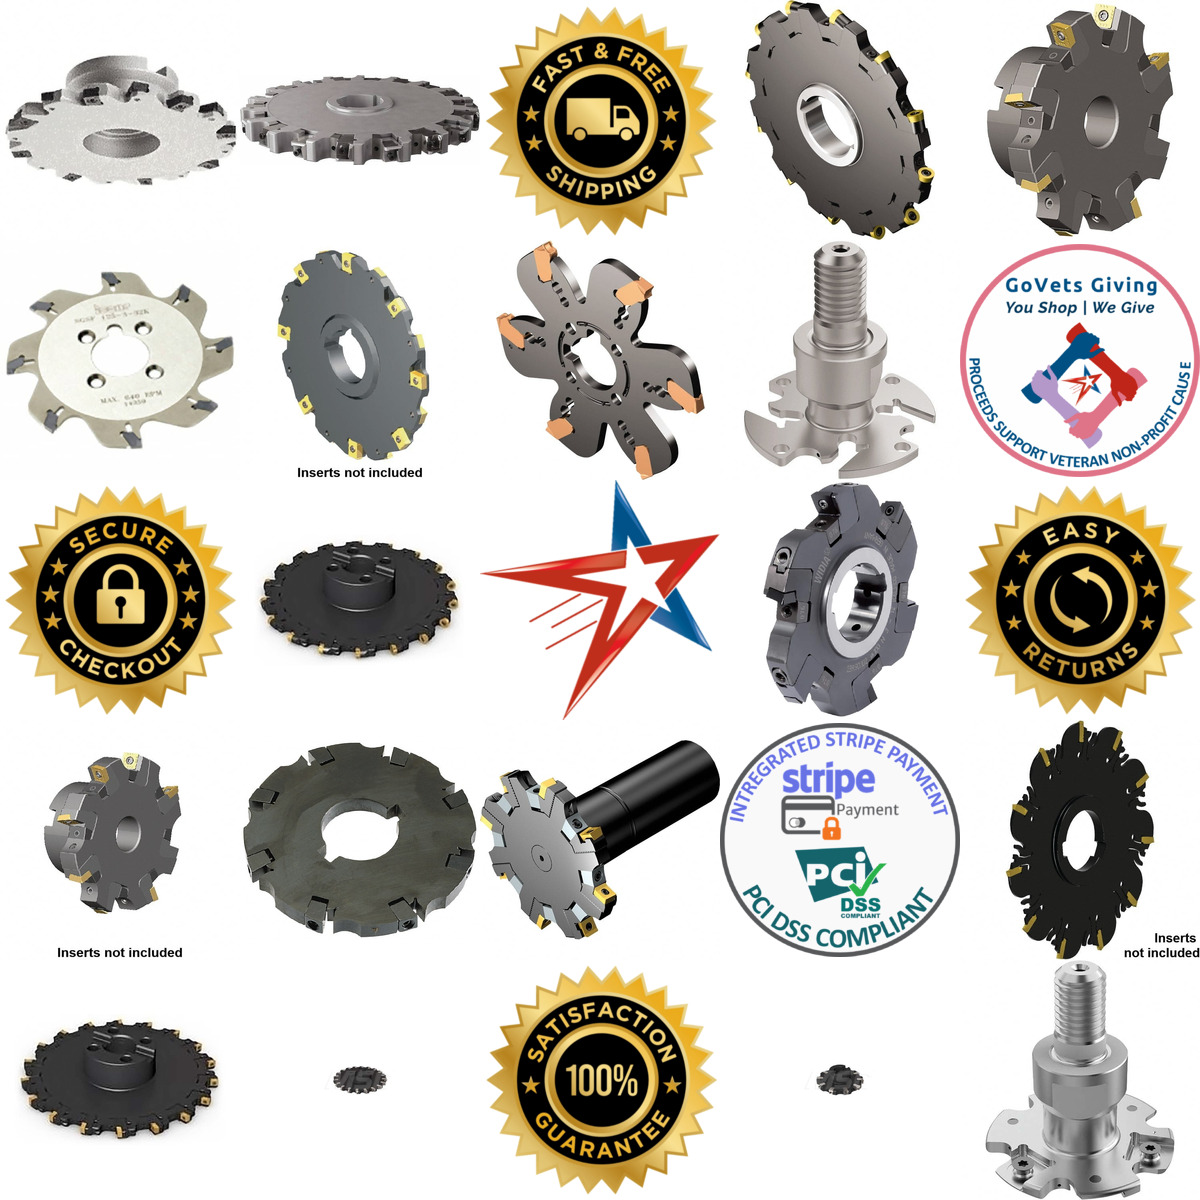 A selection of Indexable Slotting Cutters products on GoVets